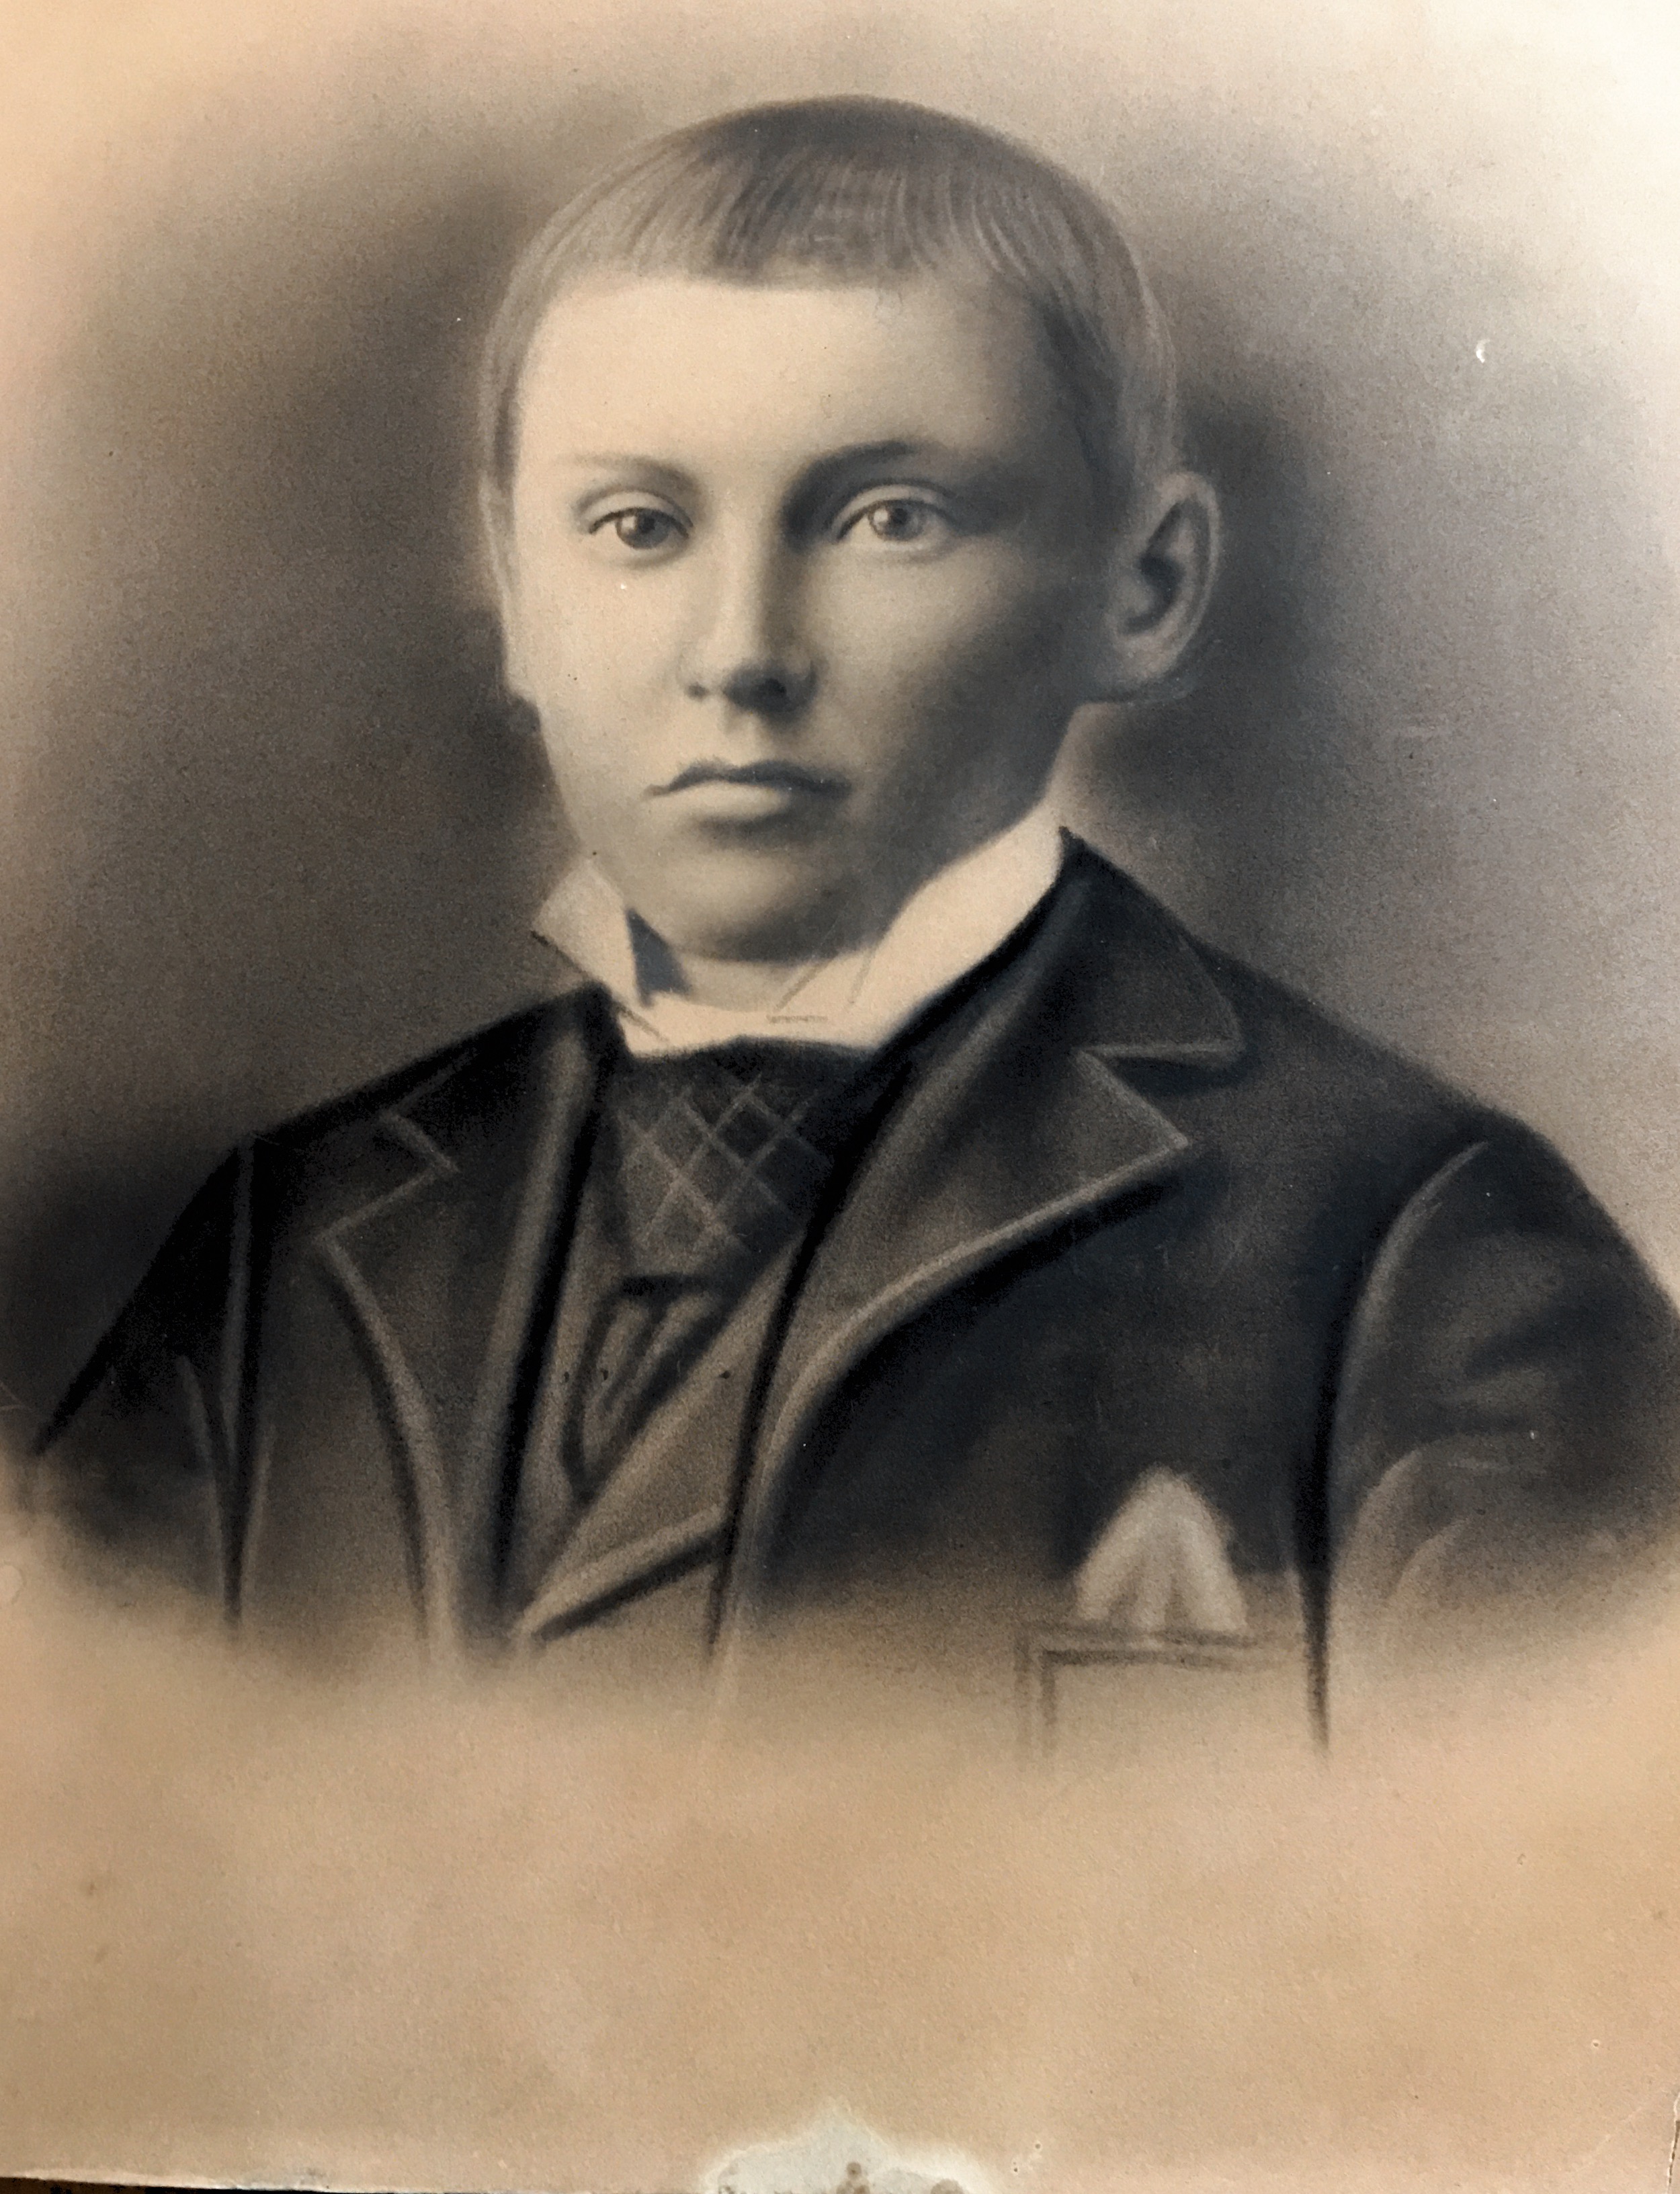 This is my grandfather. Believed taken when he was 13-15. Taken about 1894.